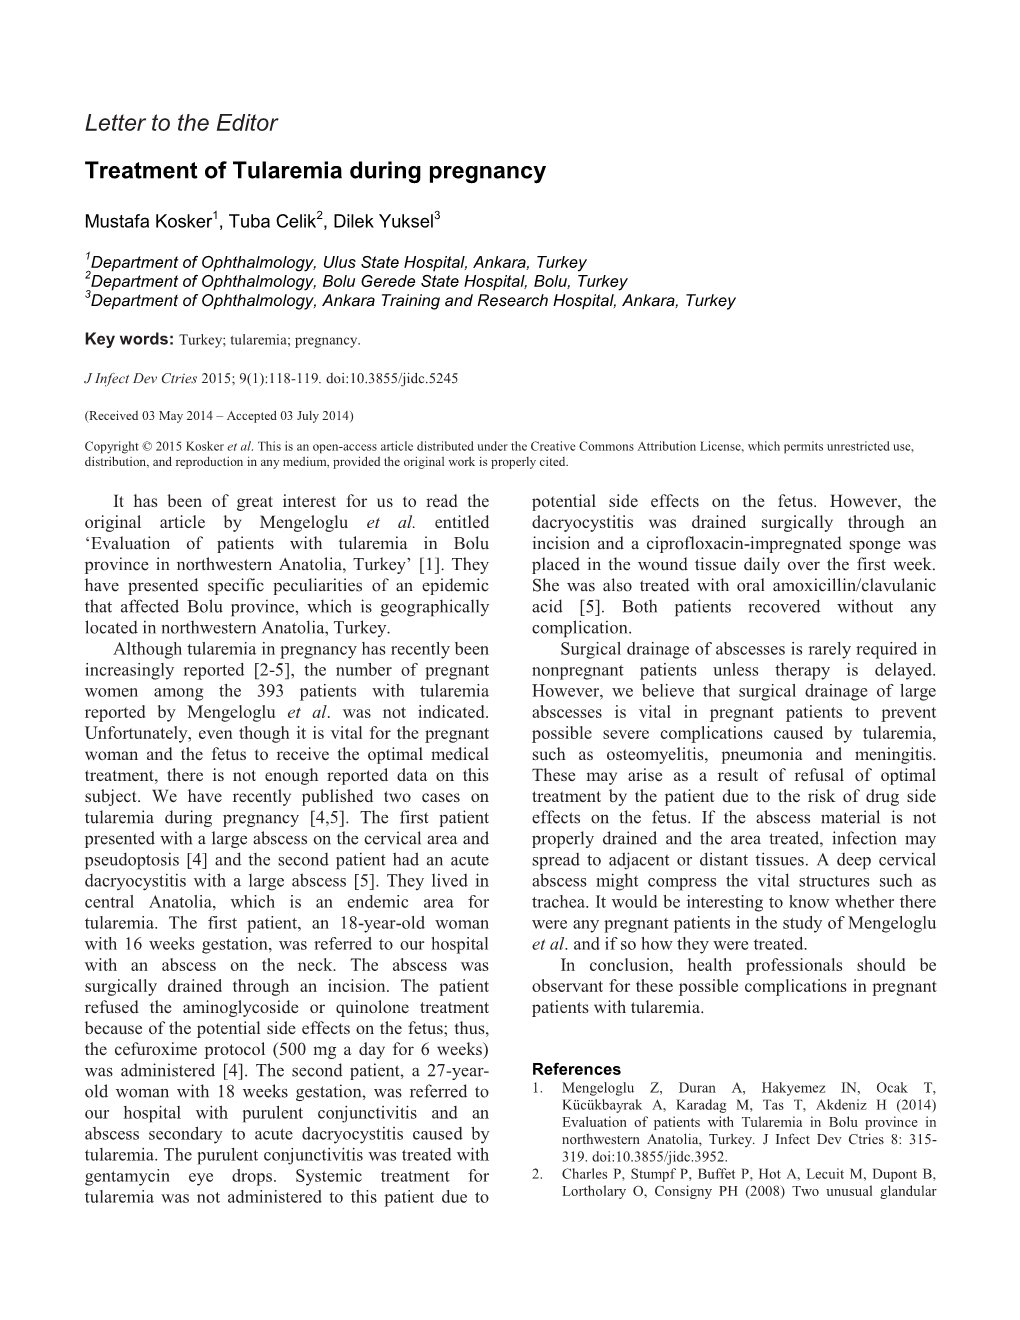 Letter to the Editor Treatment of Tularemia During Pregnancy